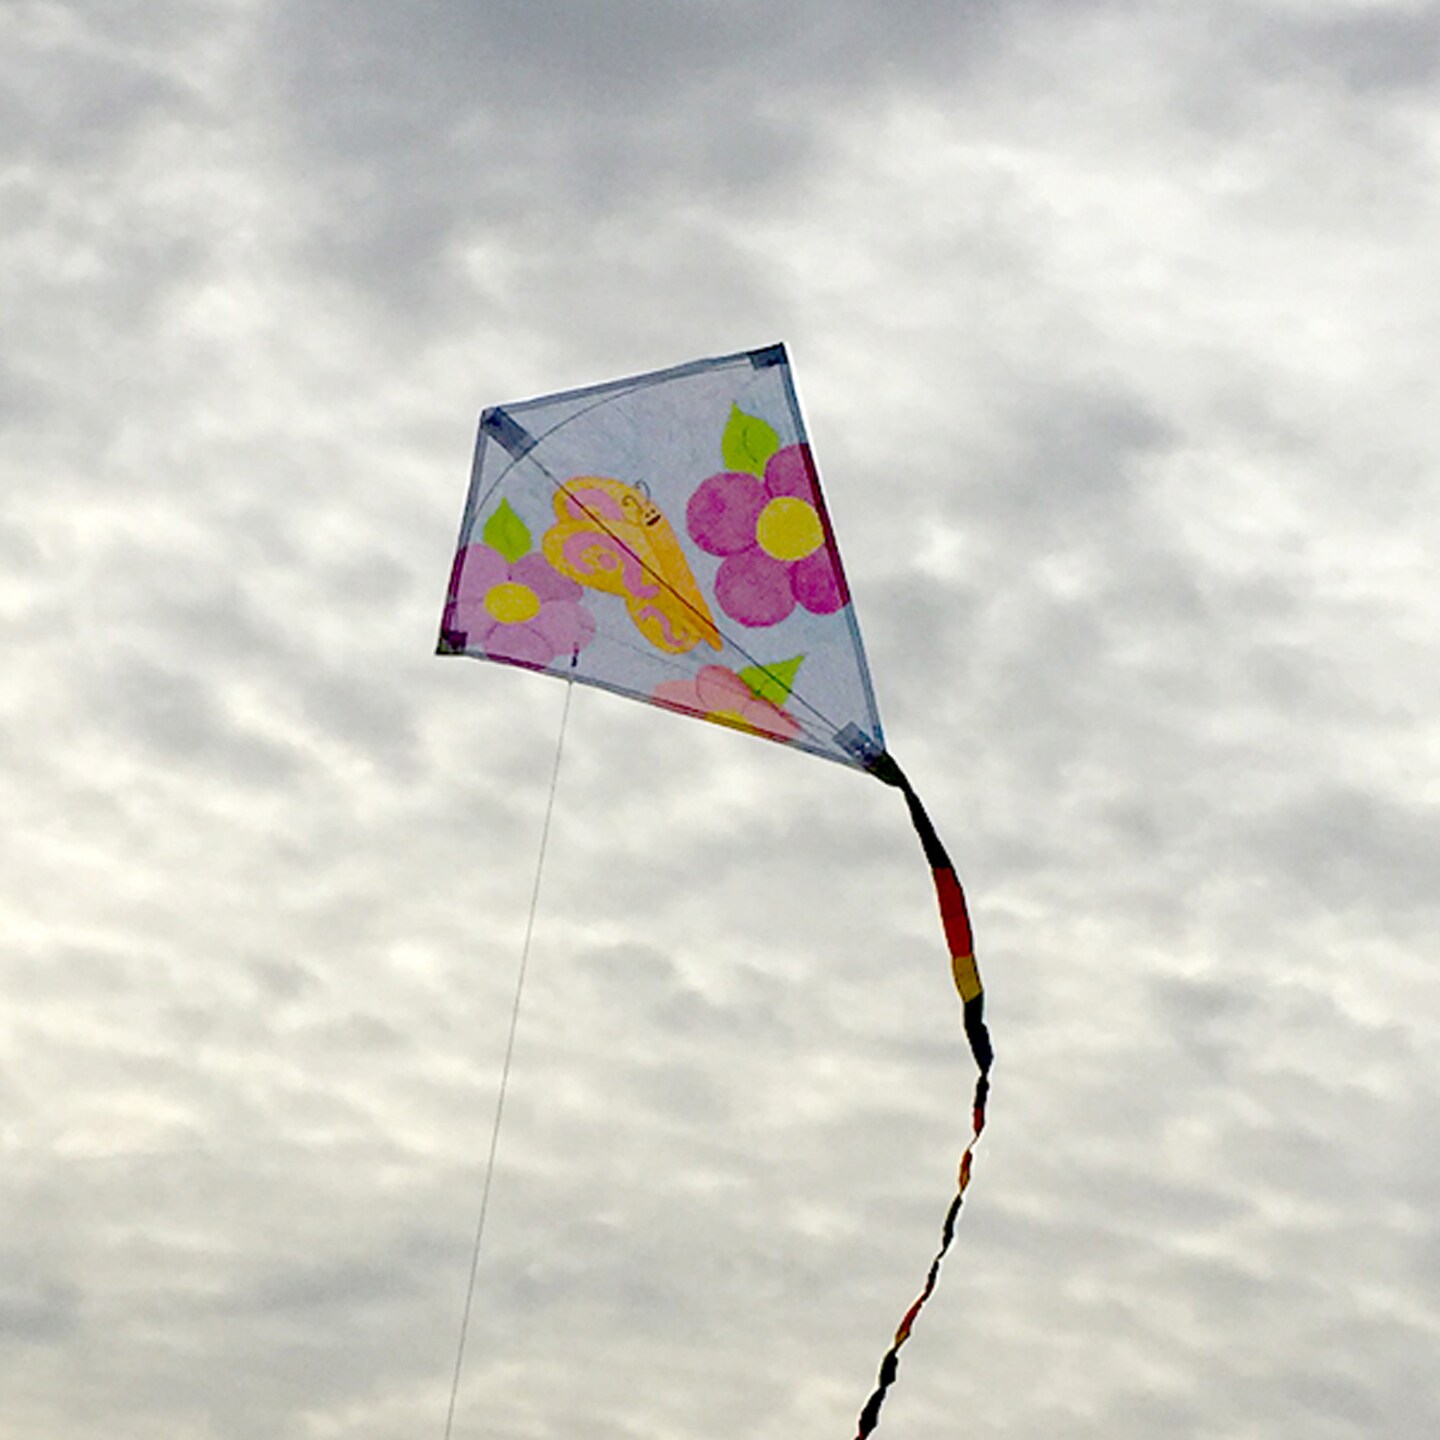 In the Breeze Coloring Diamond 20 Inch Kite - Single Line - Ripstop Fabric Kite - Includes Crayons, Kite Line and Bag - Creative Fun for Kids and Adults